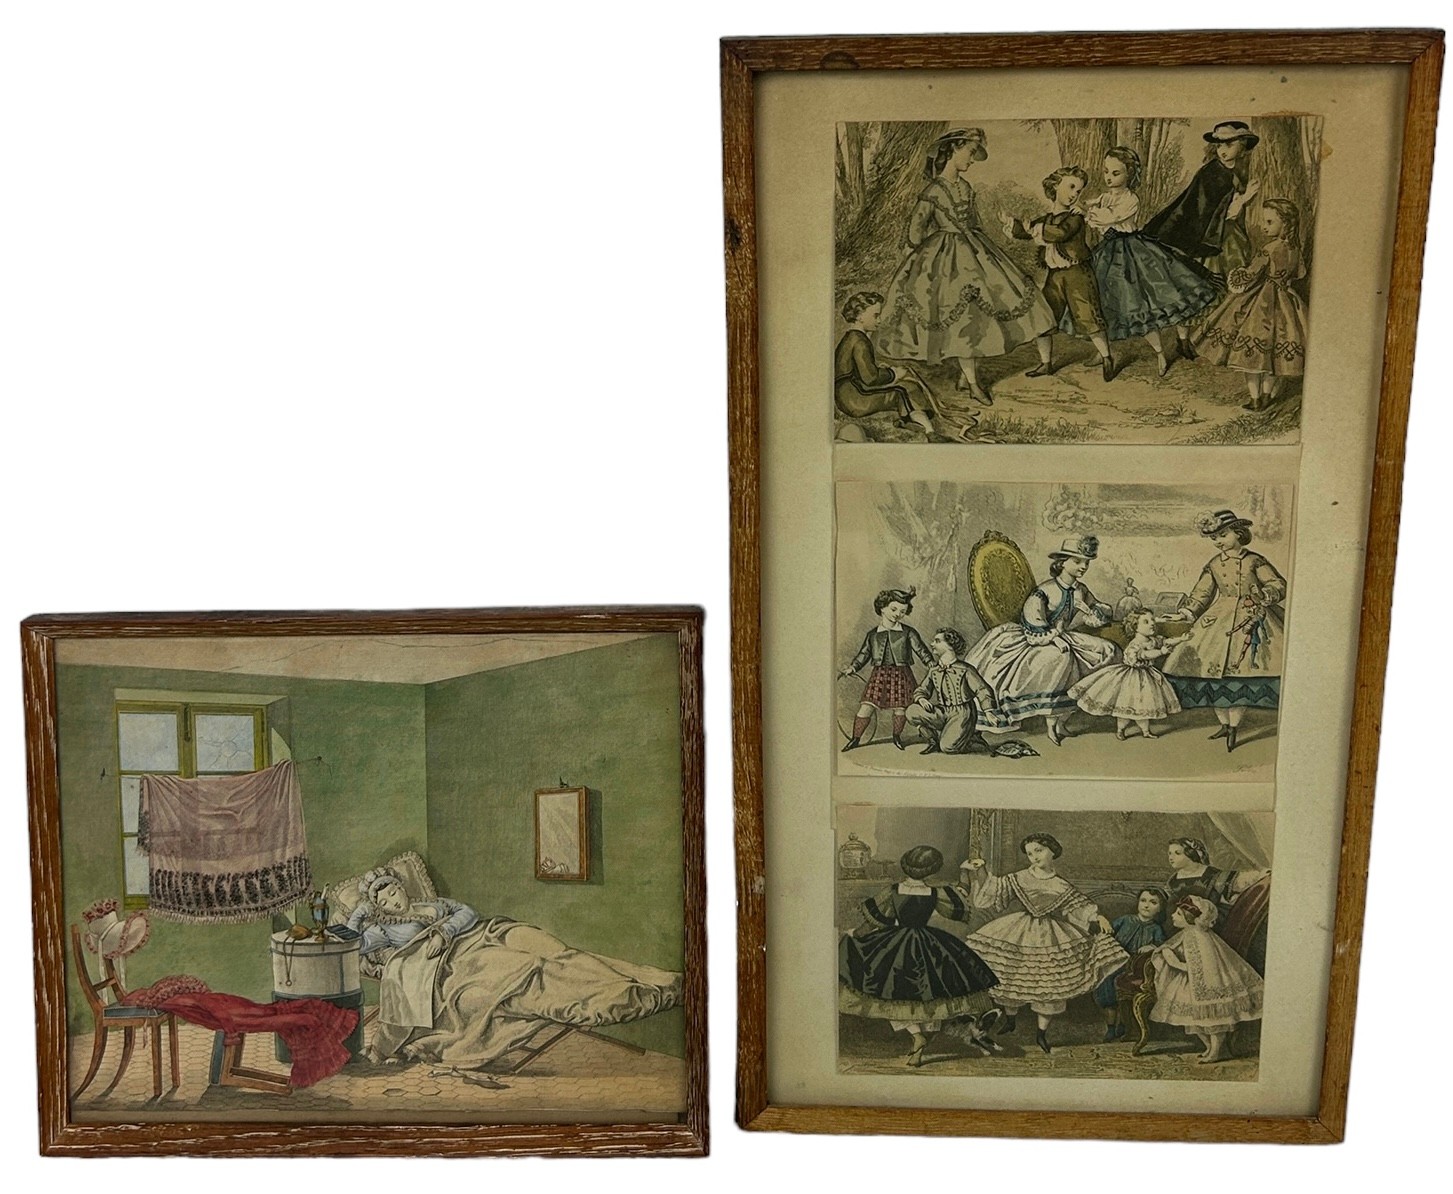 FOUR HAND COLOURED ENGRAVINGS, Three in one frame (44cm x 24cm) One in the another frame (27cm x